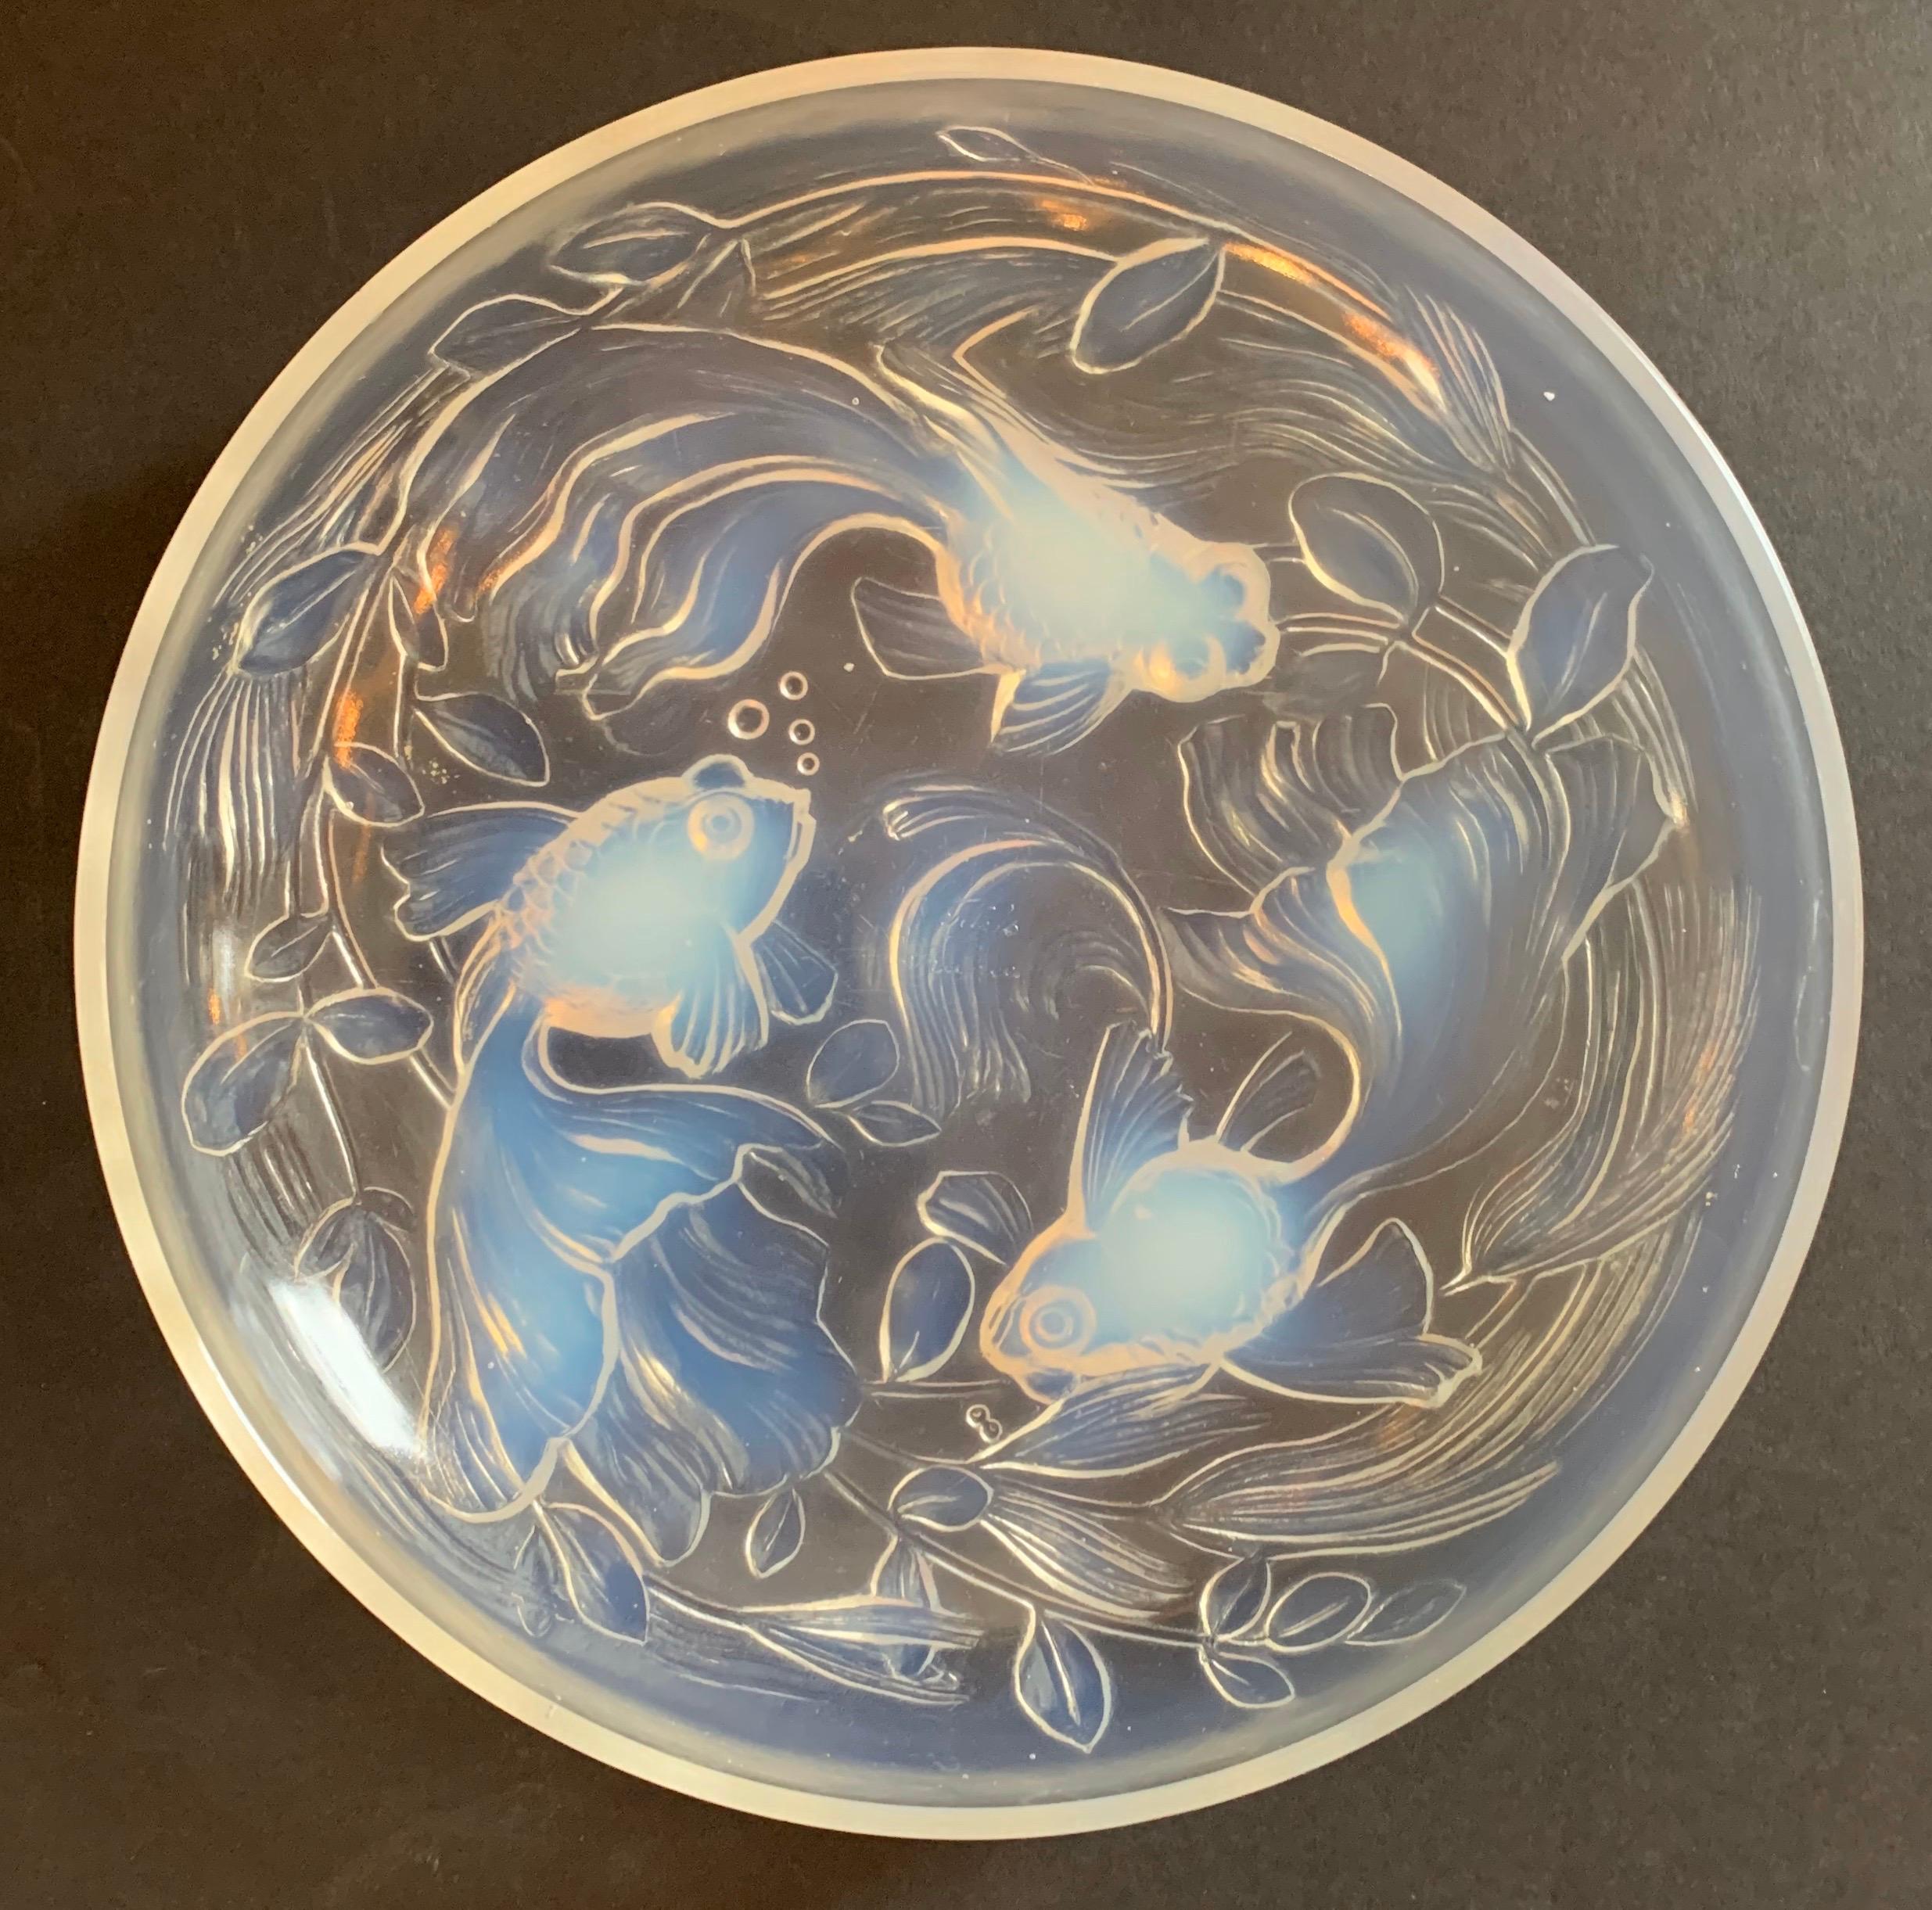 A wonderful and rare Verlys France Poissons Koi Fish opalescent centerpiece large bowl.